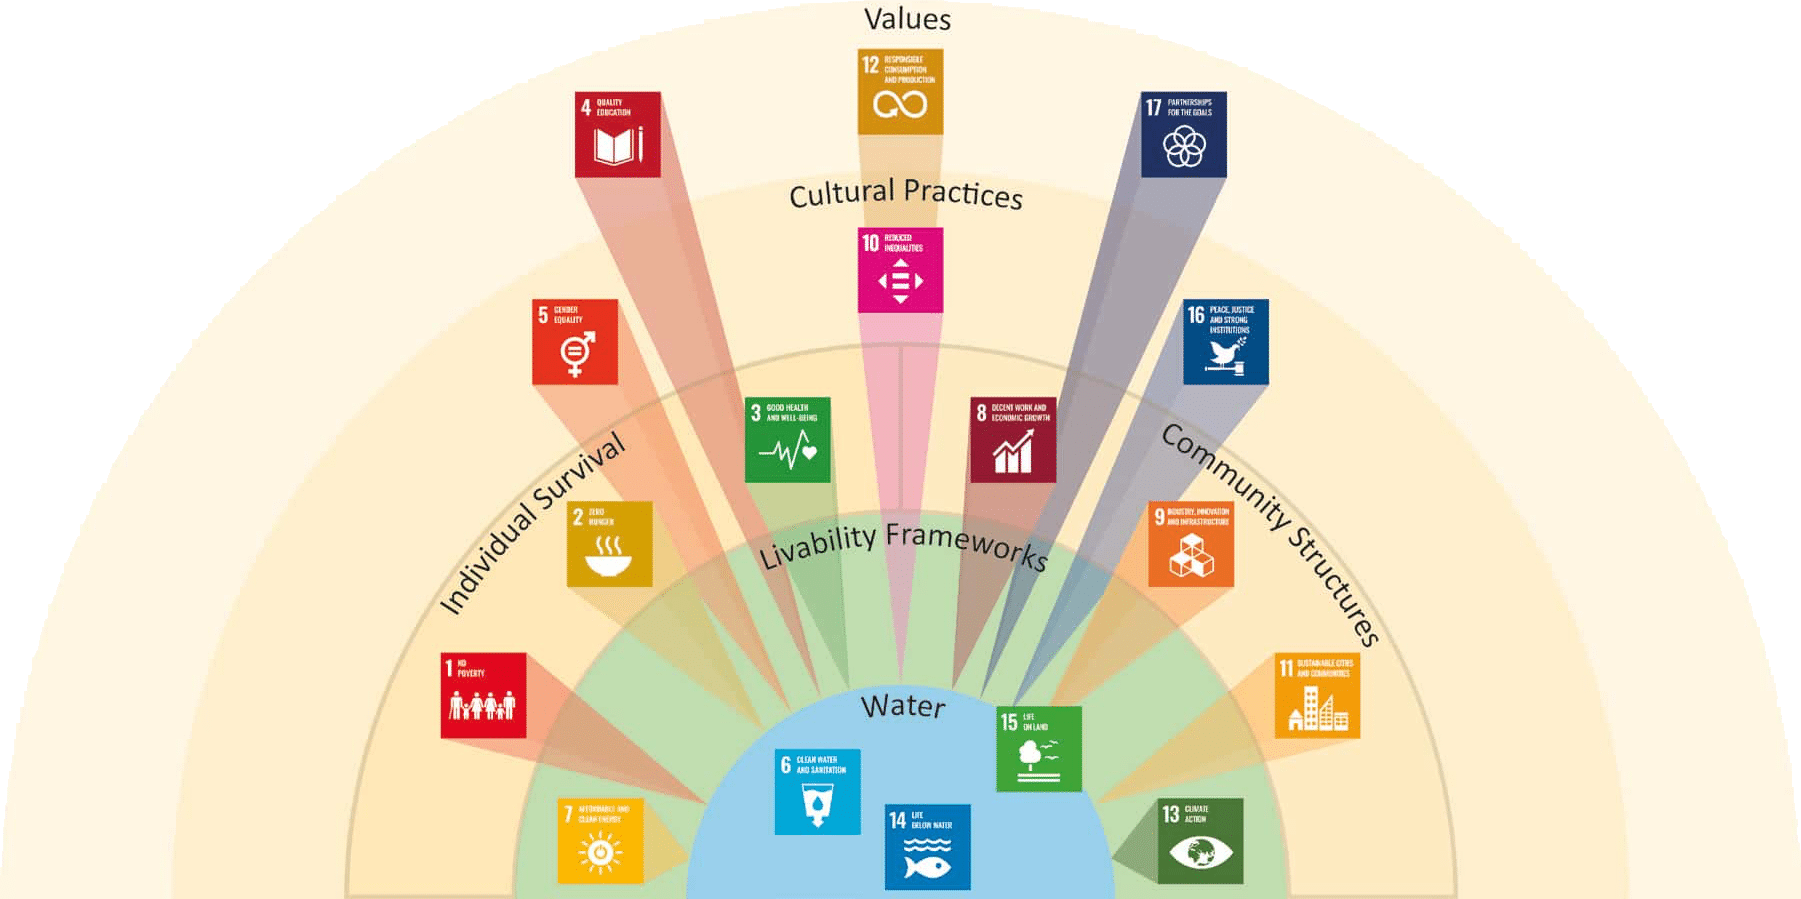 Conceptualization of the SDGs through the lens of water and culture (Source: Carola Hein, 2022).